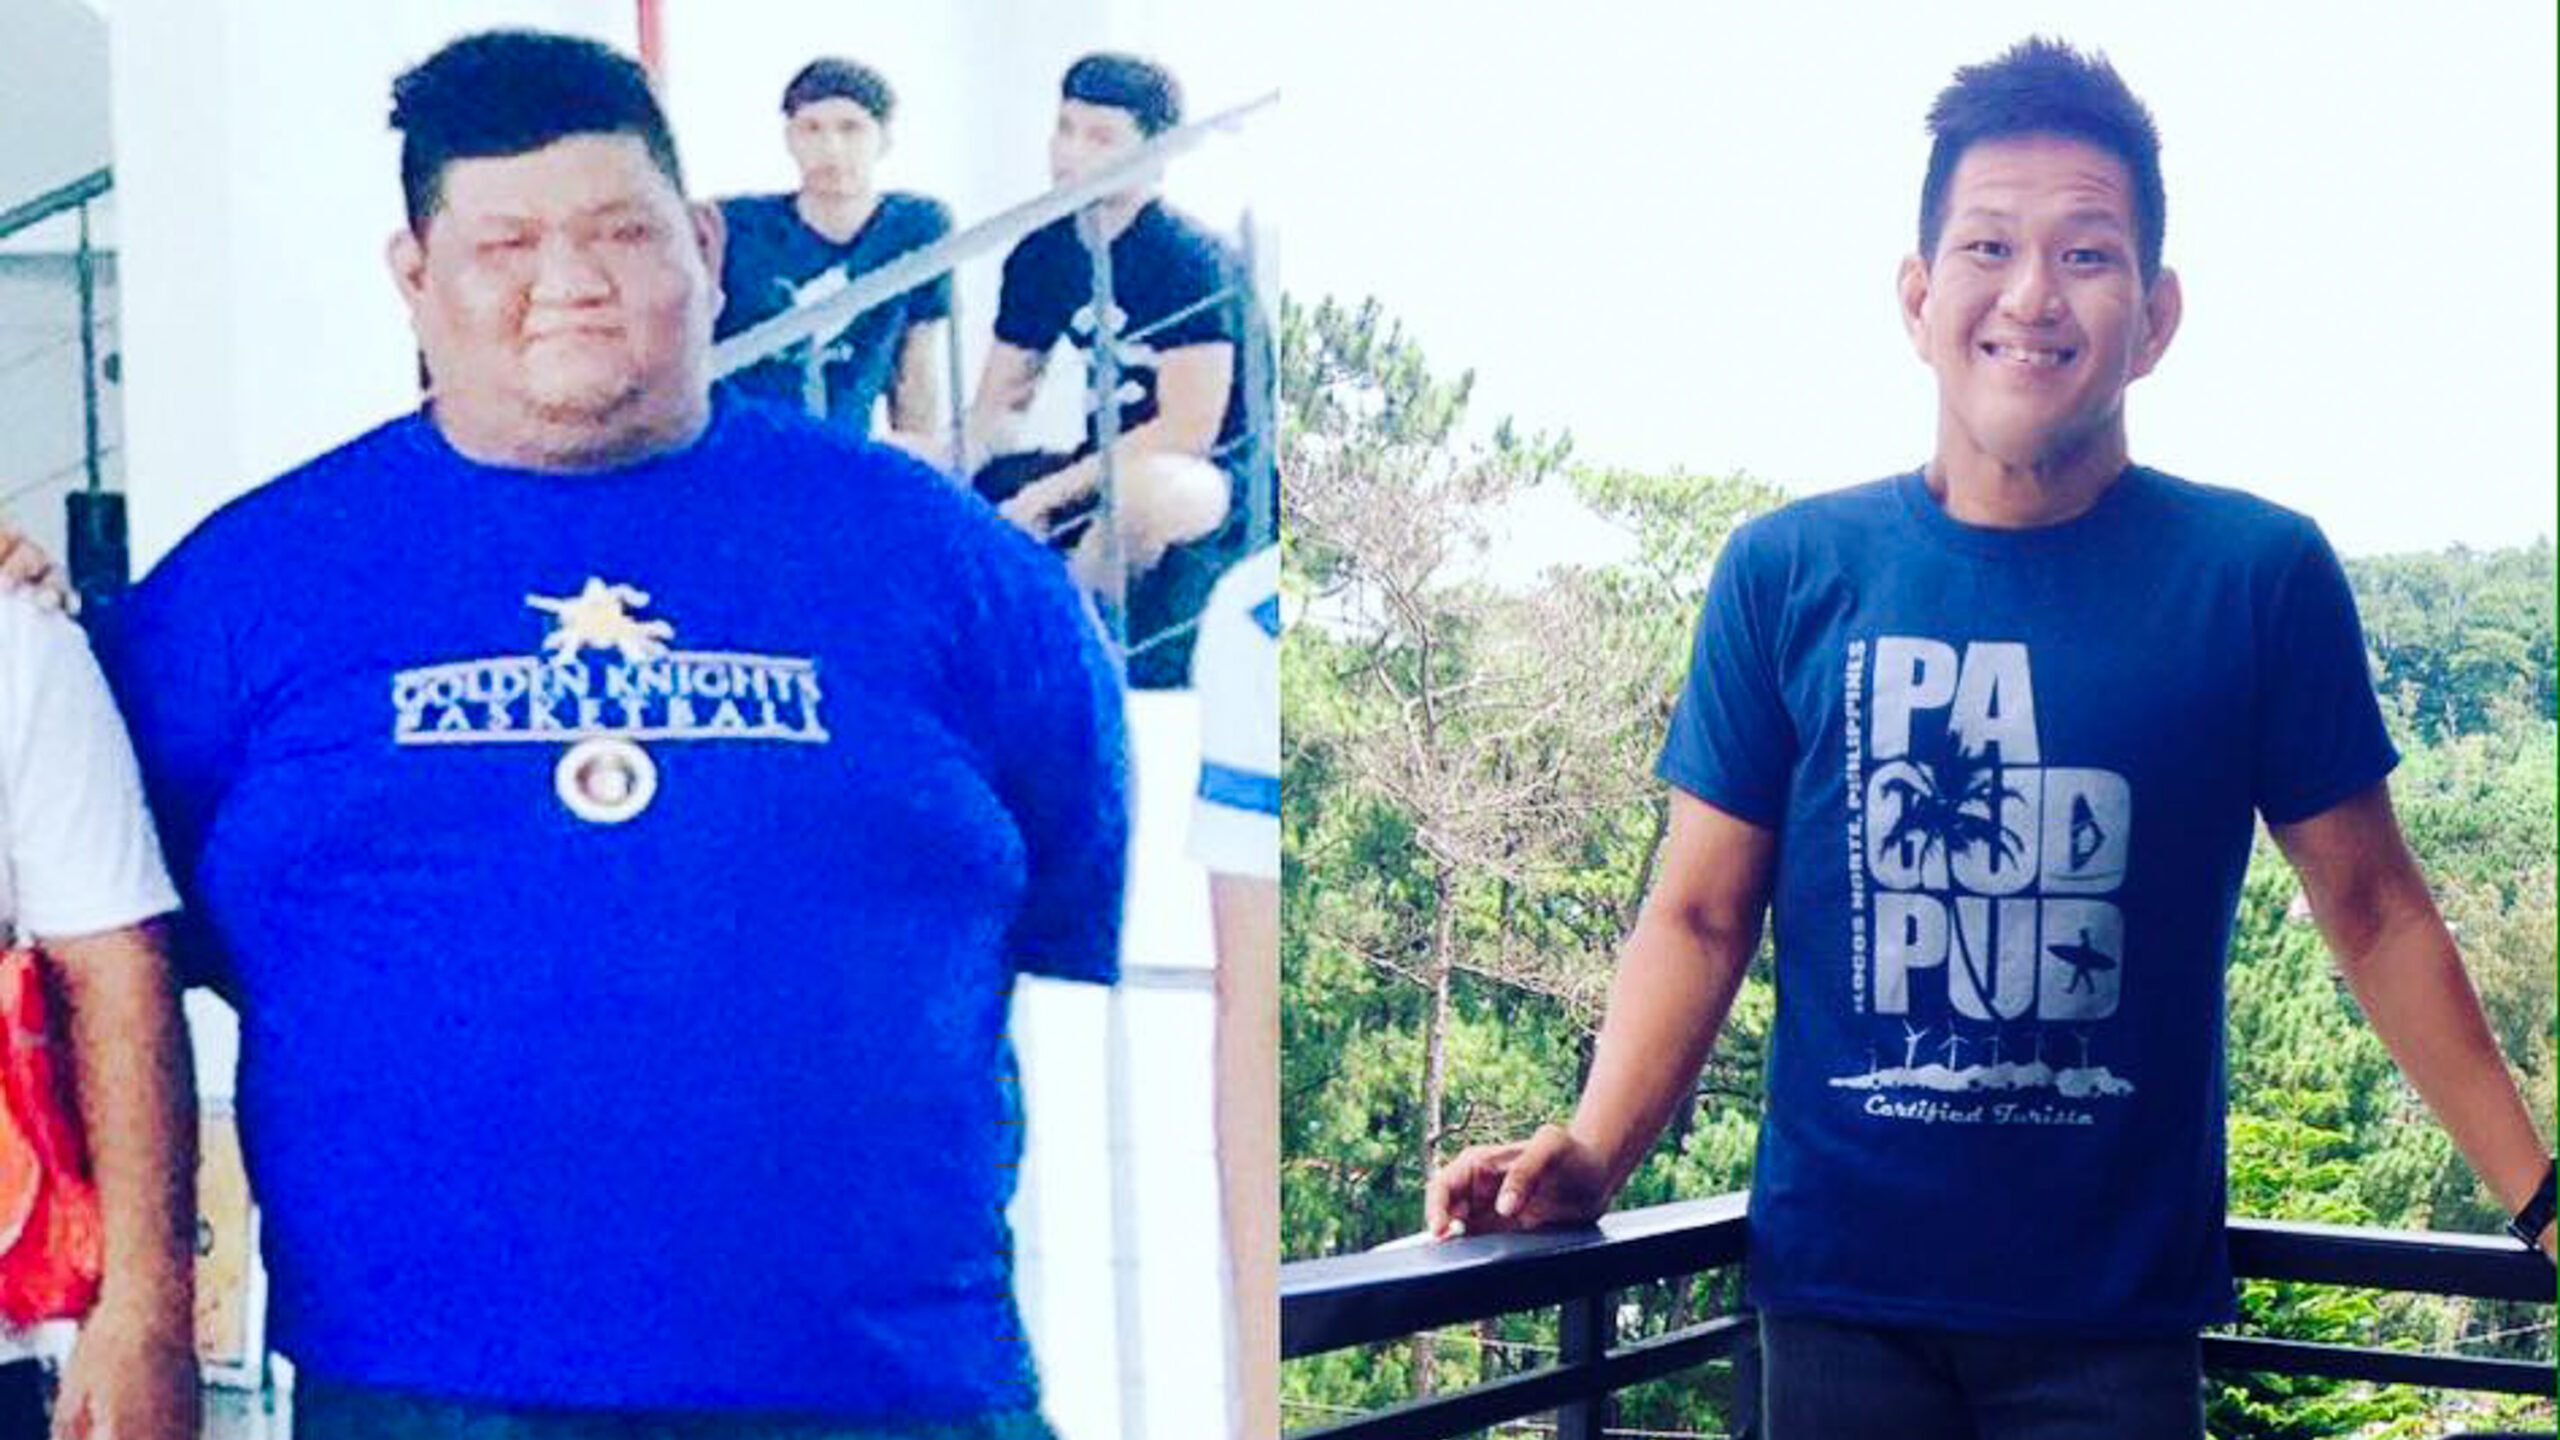 This guy lost 156 pounds in a year – here’s how